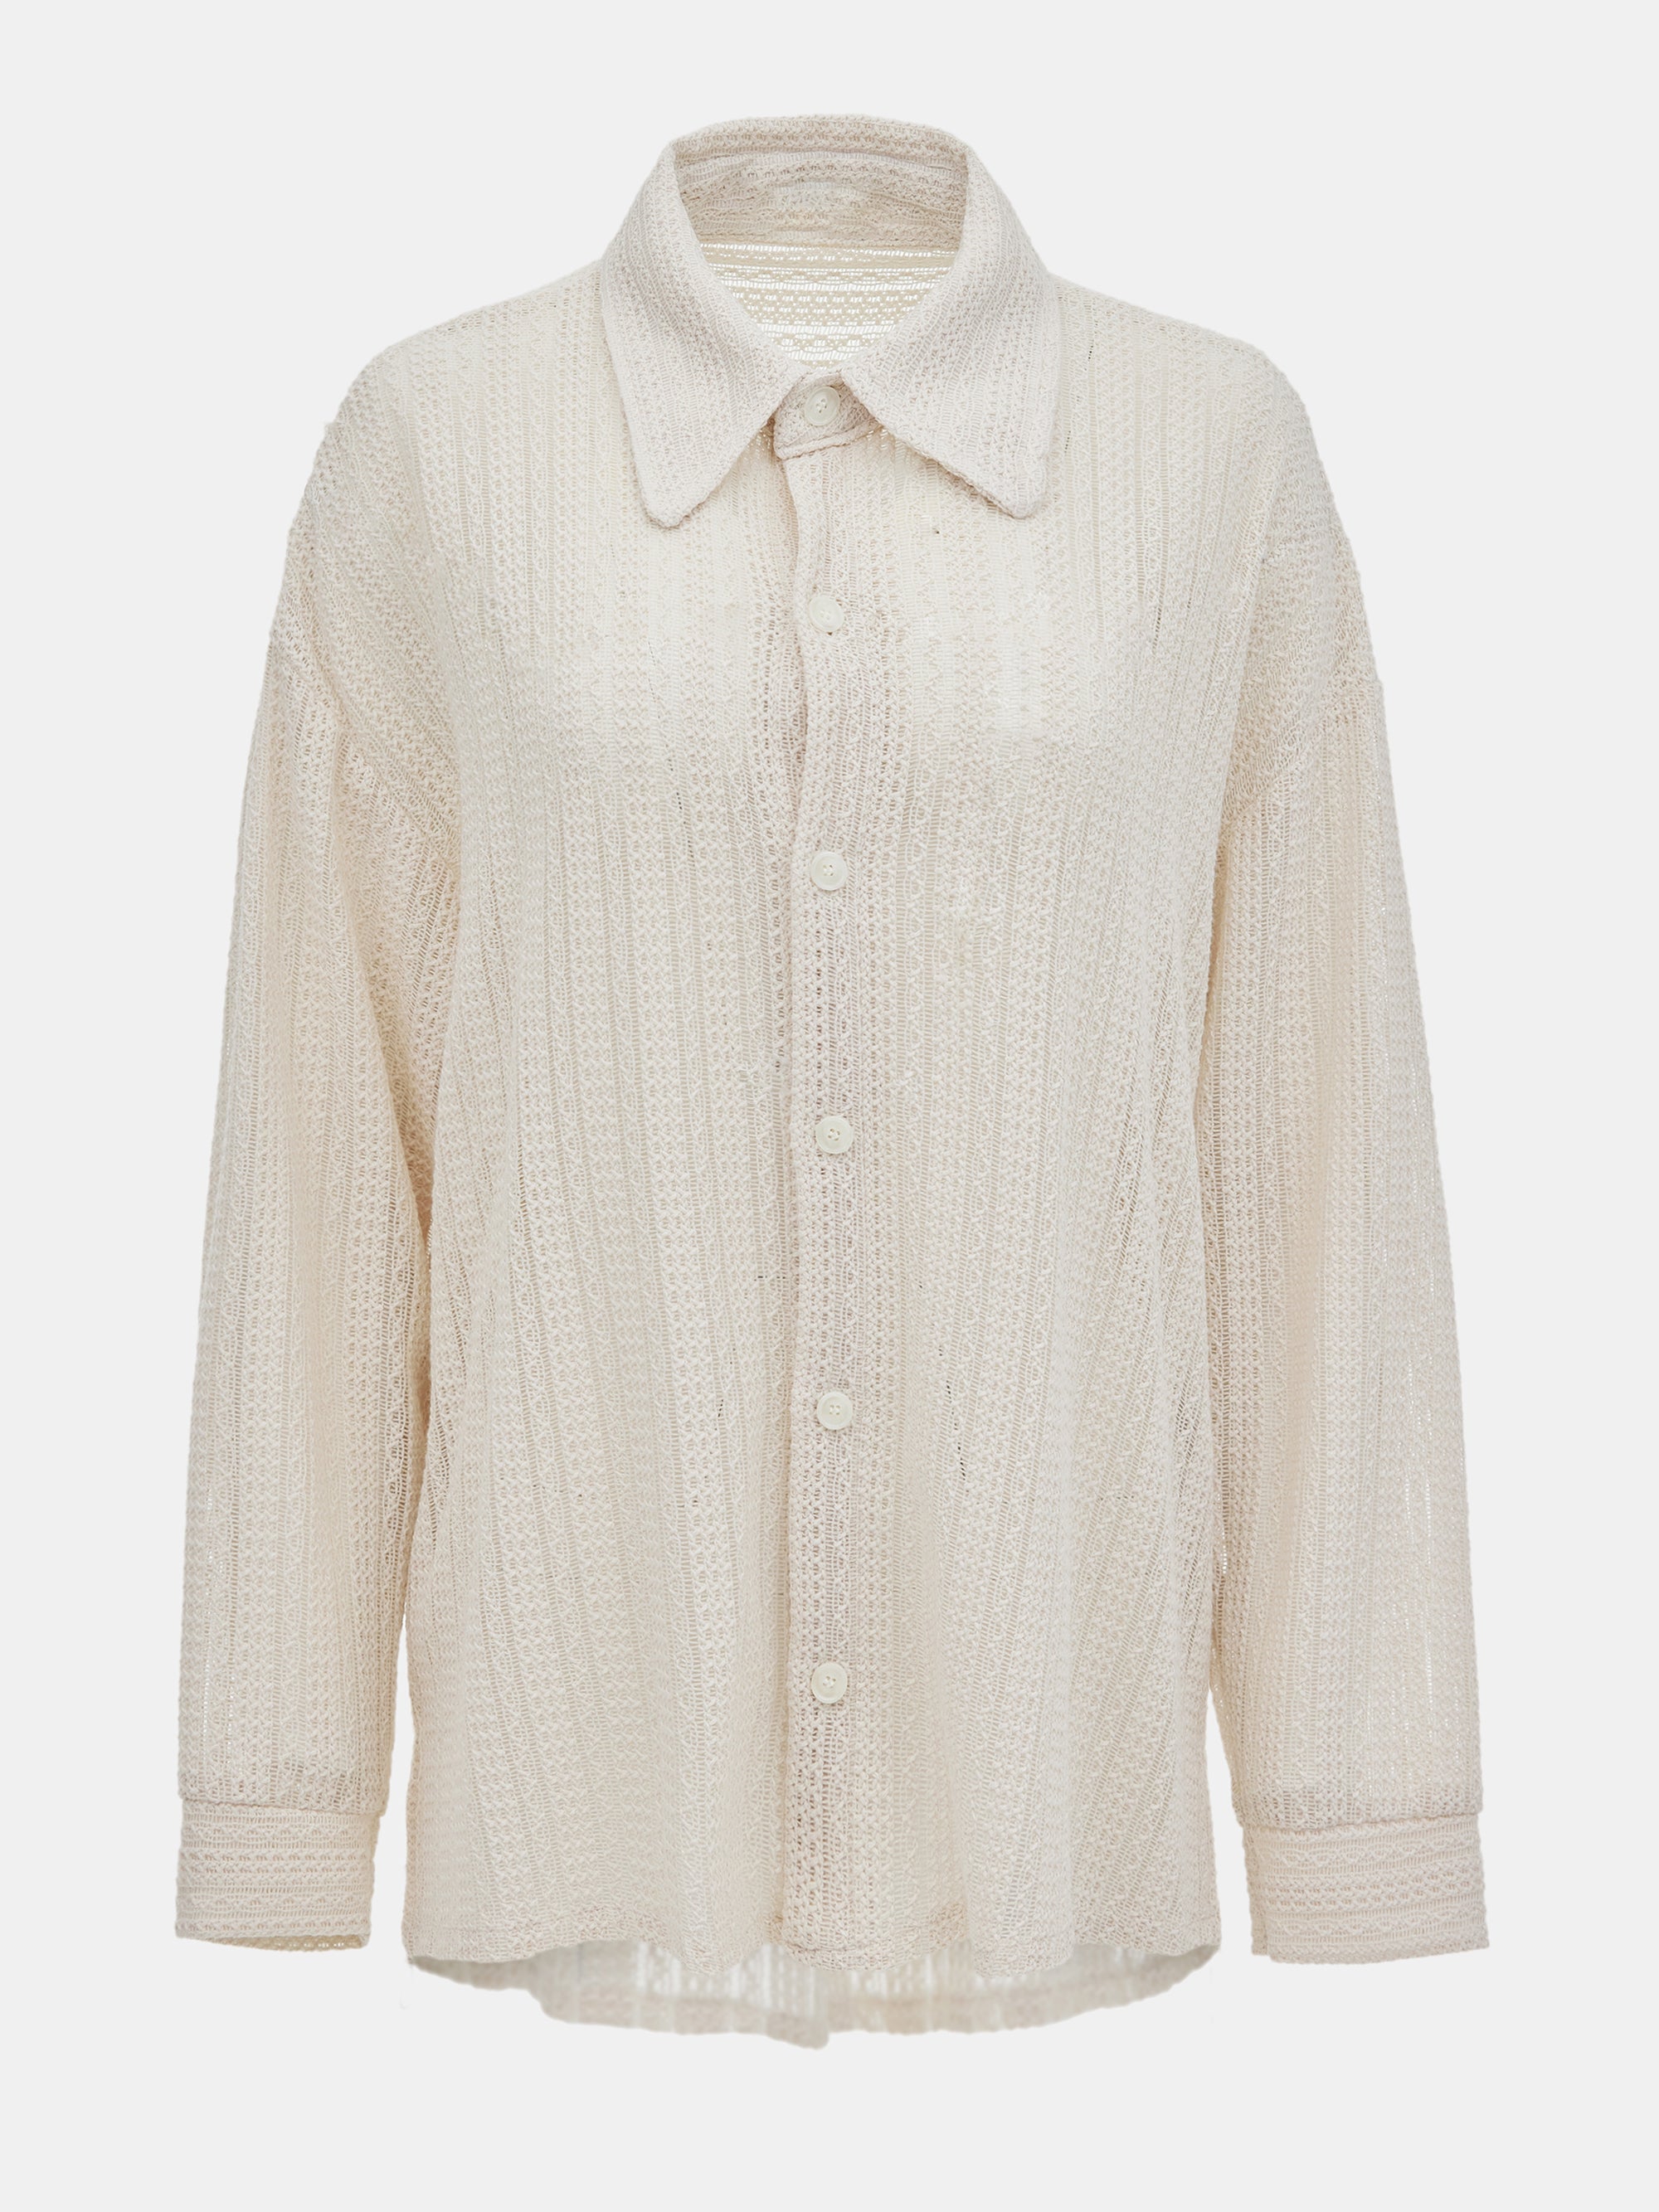 Pointelle Oversized Button Down Shirt, Ivory – SourceUnknown